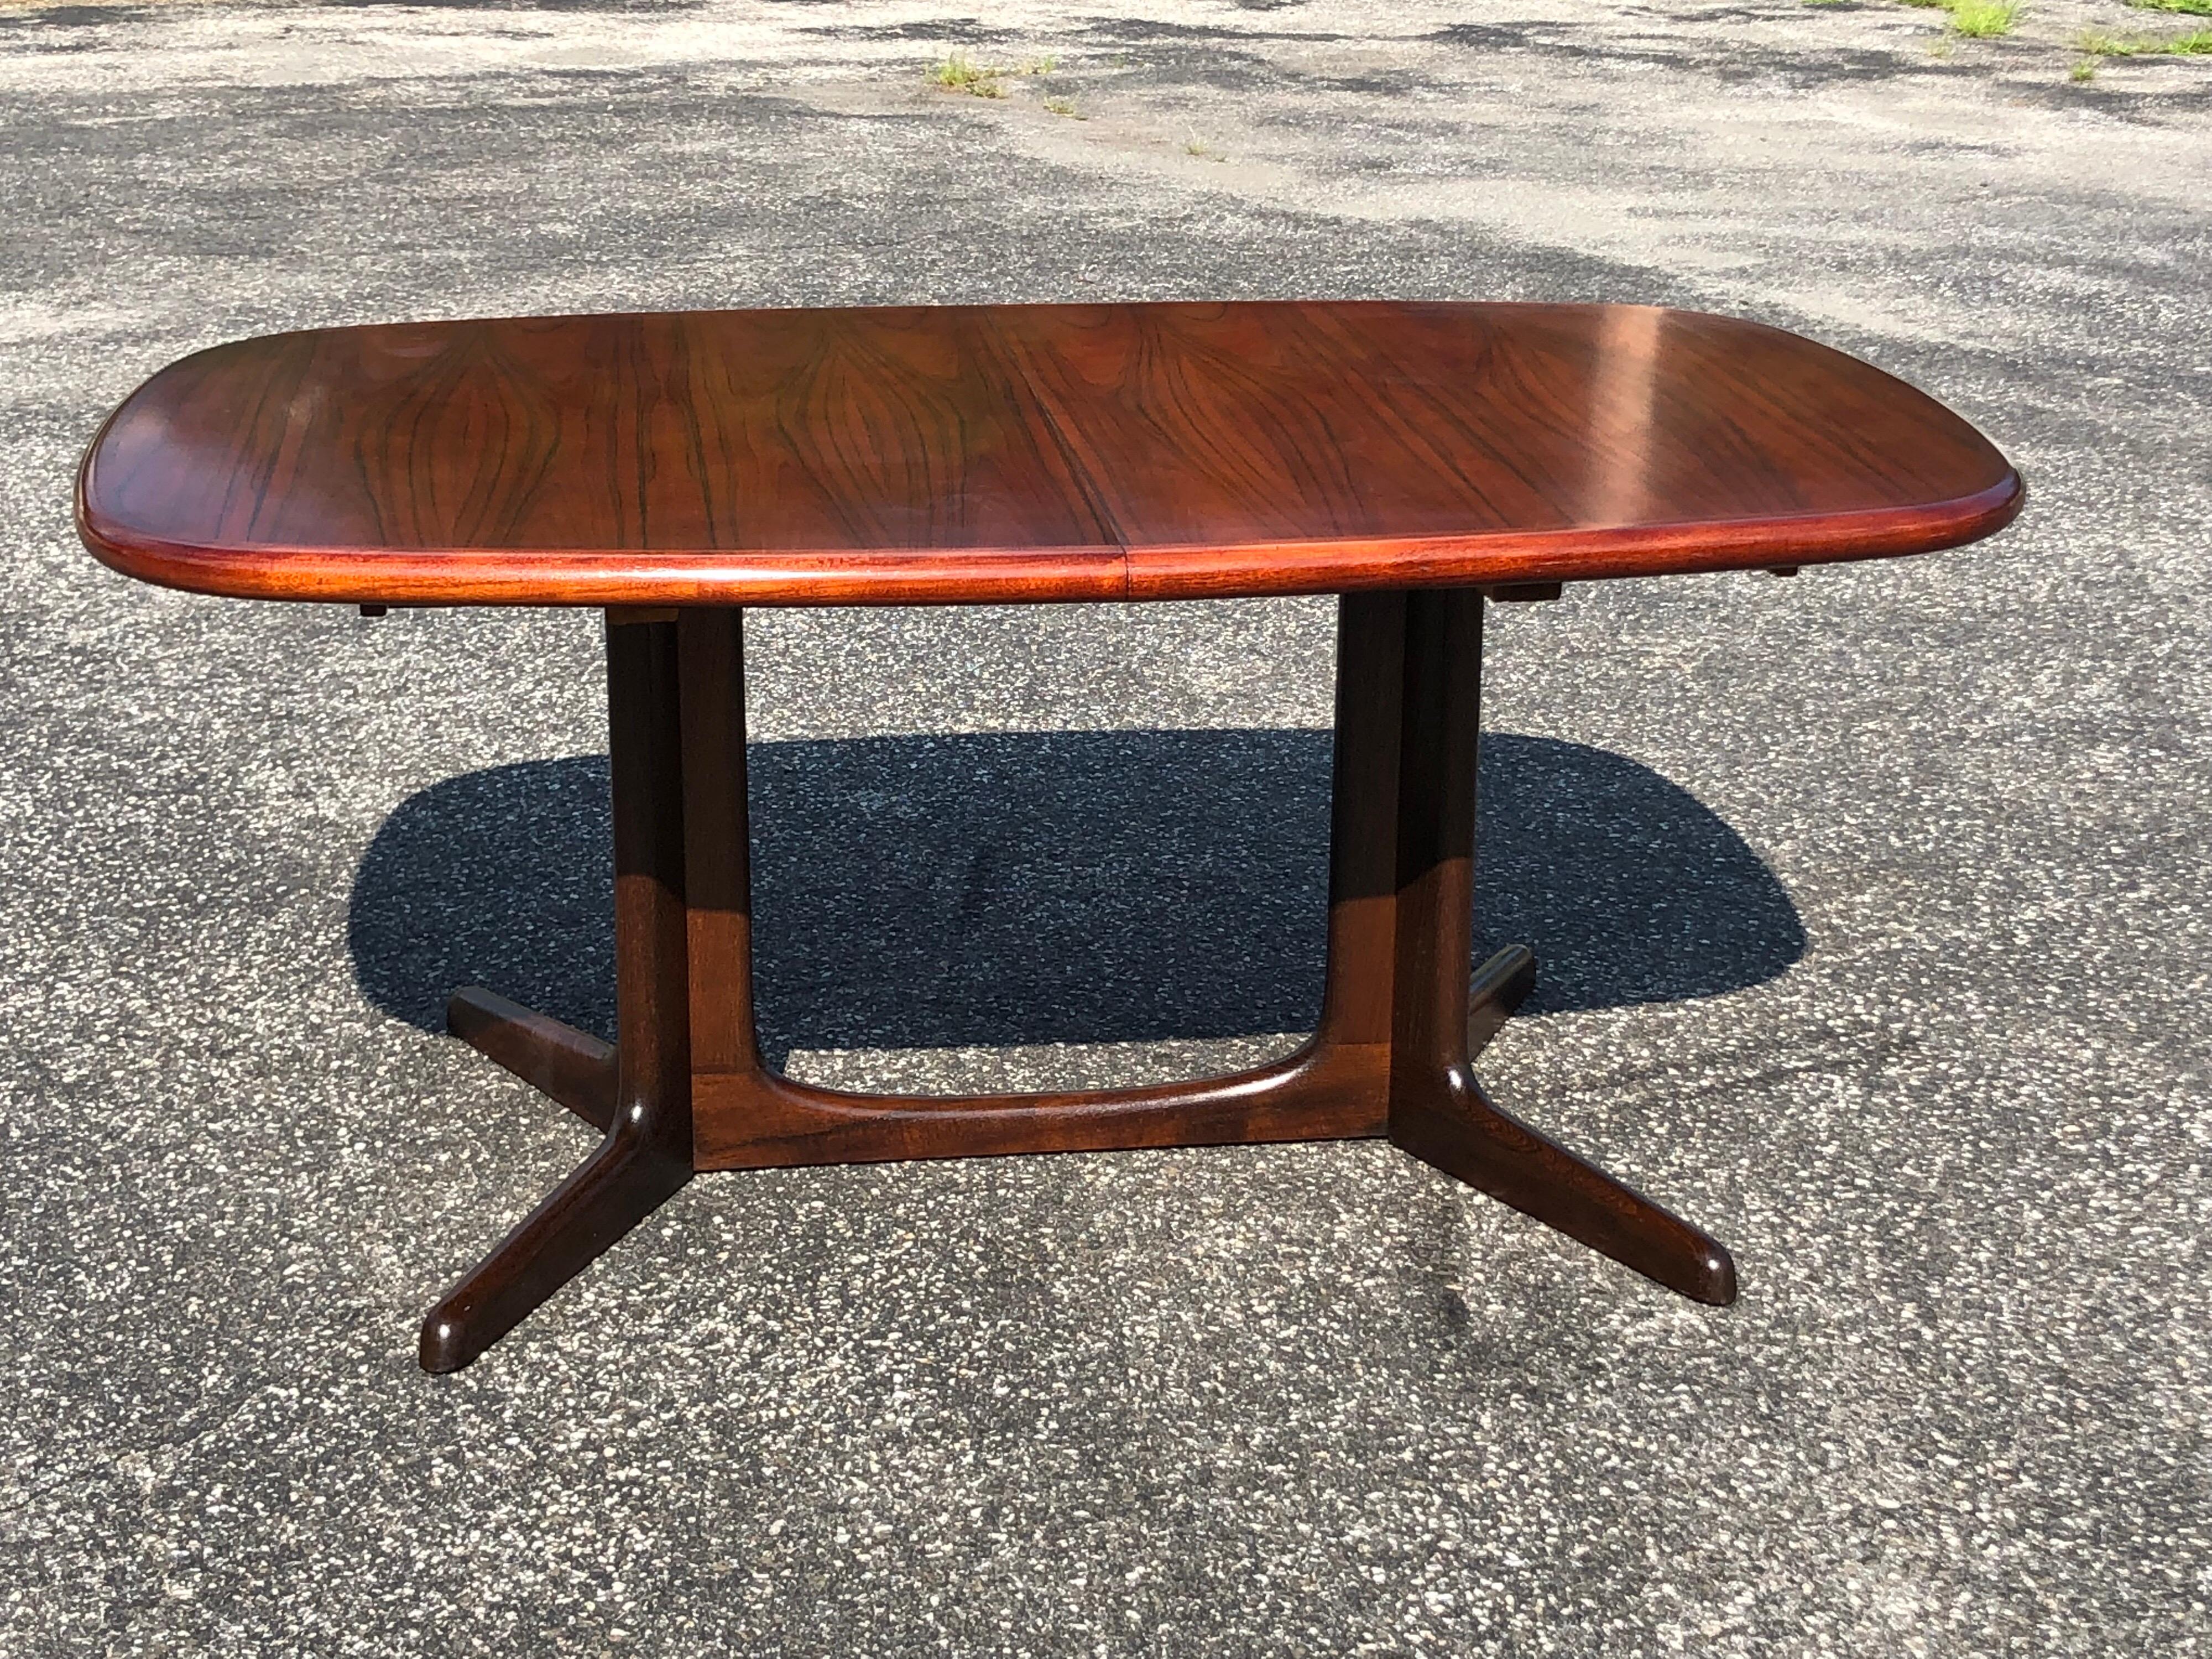 Mid-Century rosewood extension table by  Niels Otto Moller for Gudme Mobelfabrik. Comes with two leaves. Amazing tones to this smartly designed table. The simple double pedestal base is Classic in style as well as the rounded oval lines. Seats up to